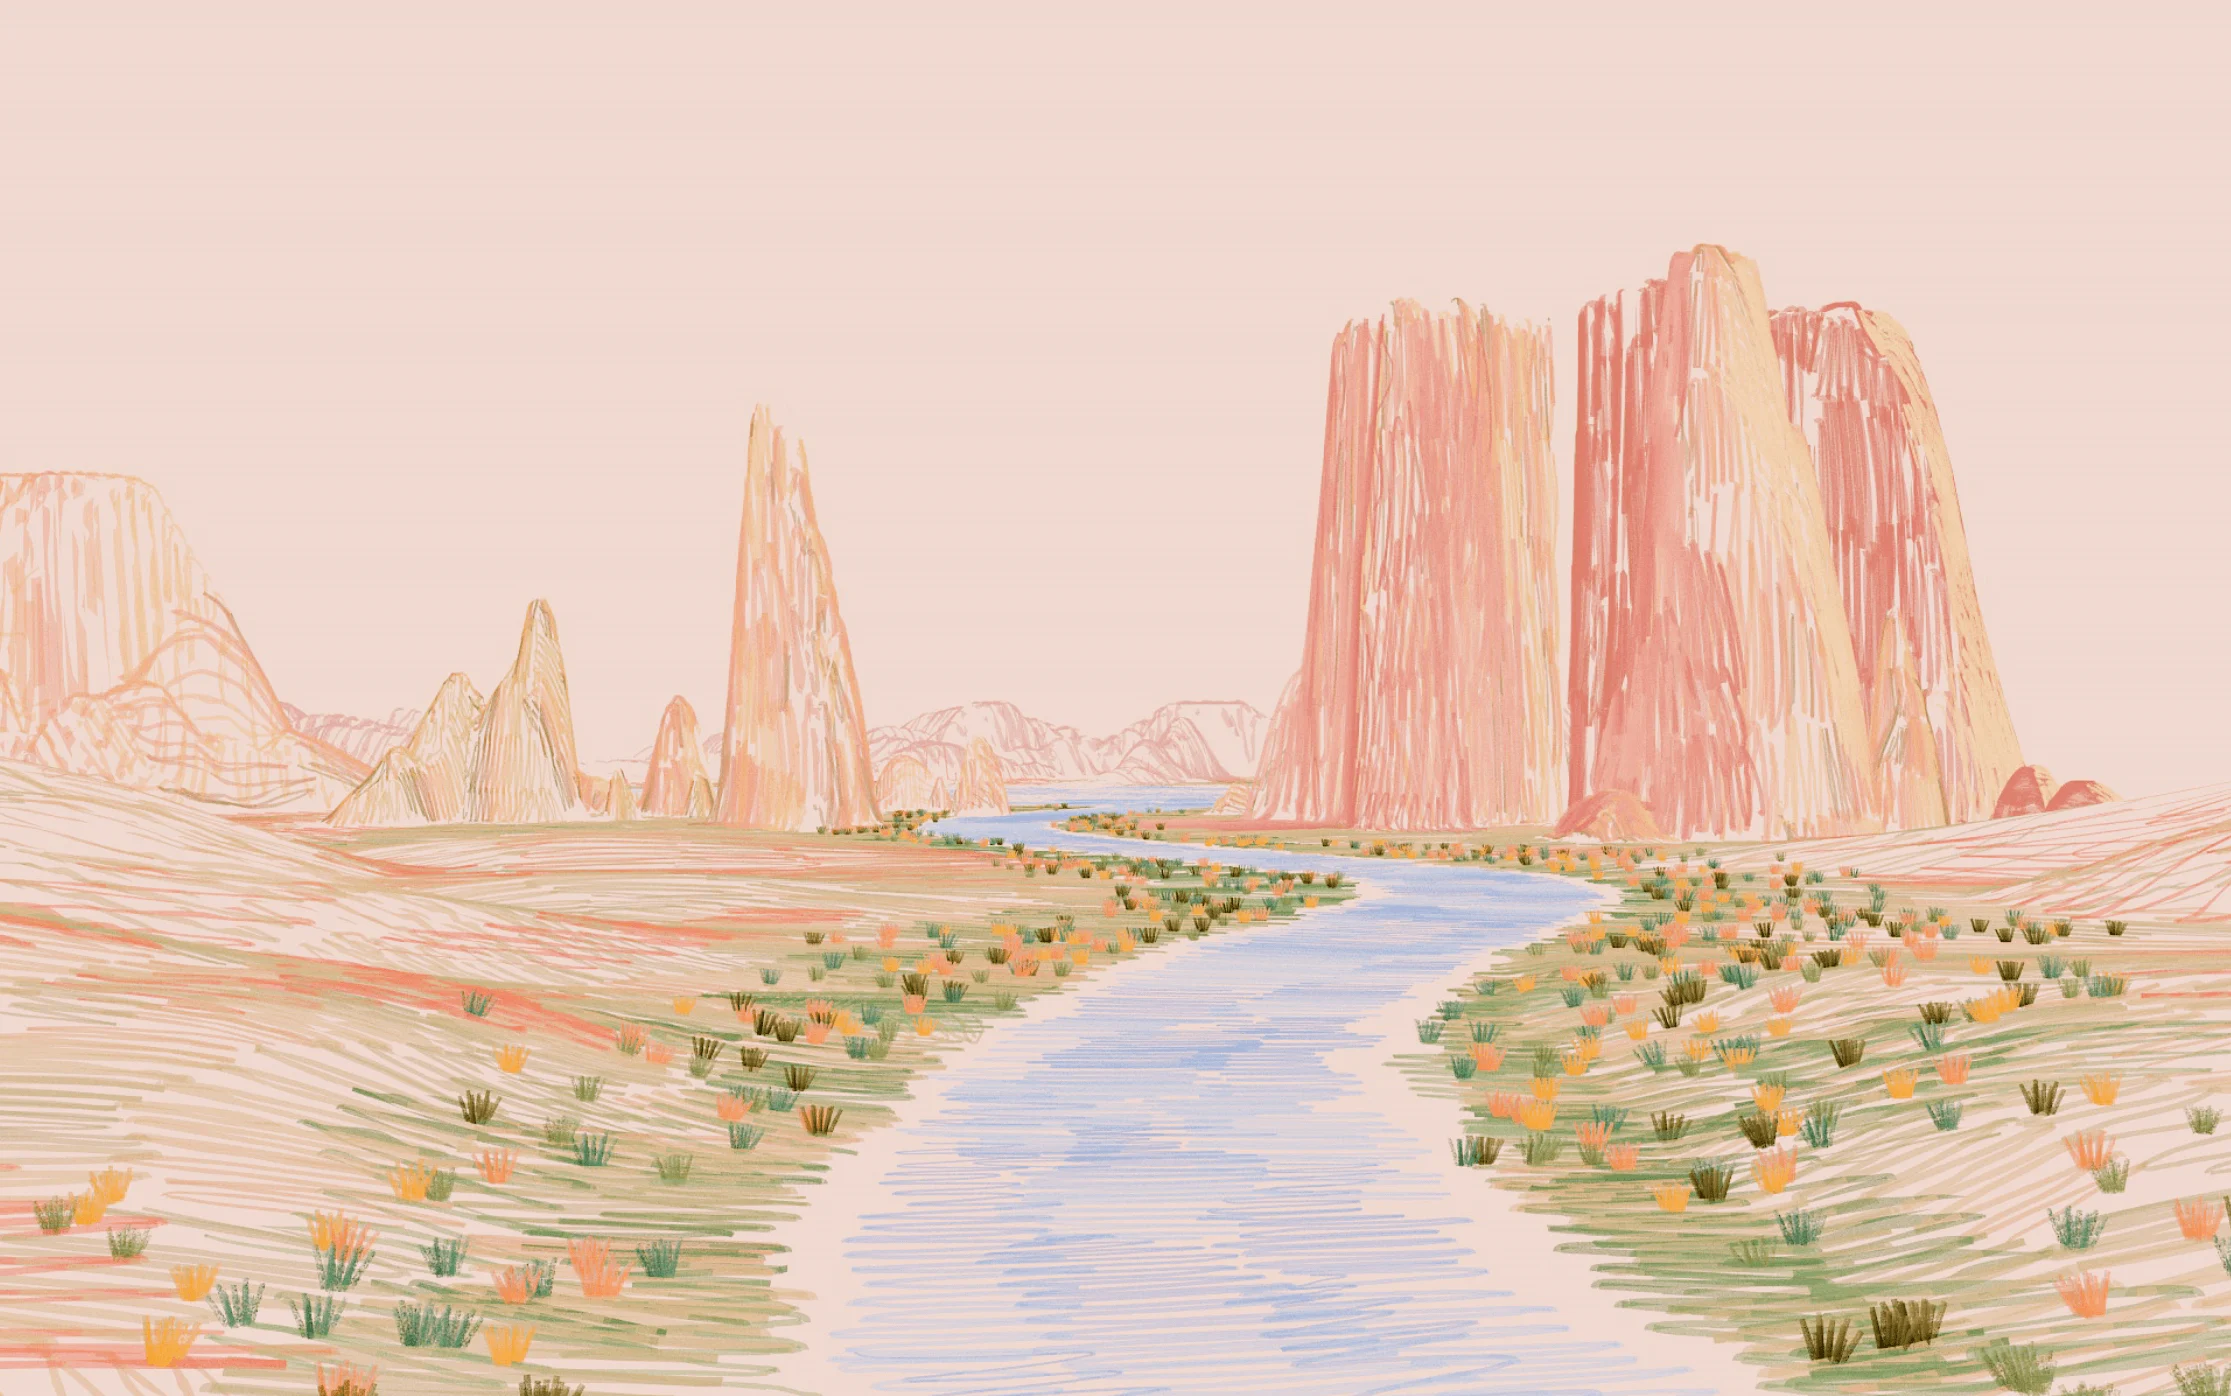 A screenshot from an animation of a desert landscape, with large mountains, a river and greenery sprouting from the ground.